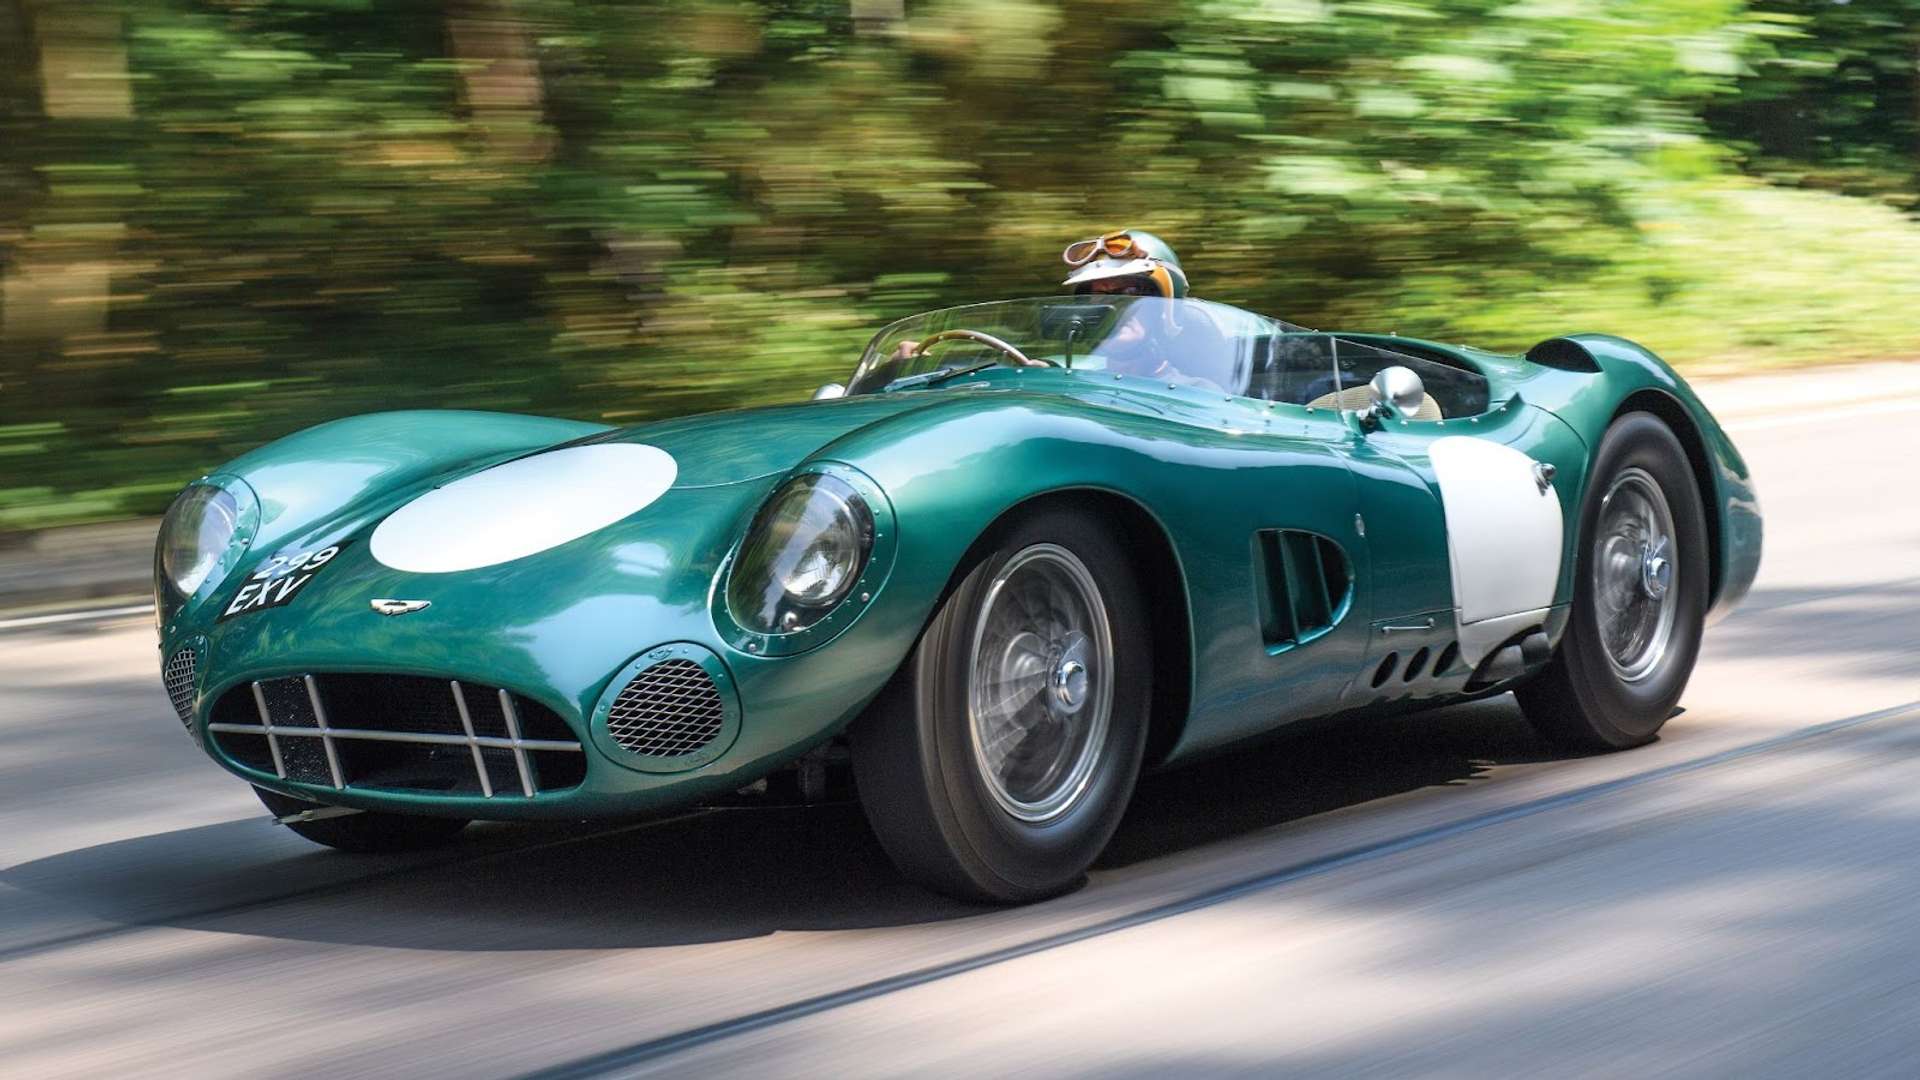 A green and white Aston Martin DBR1 on the road.